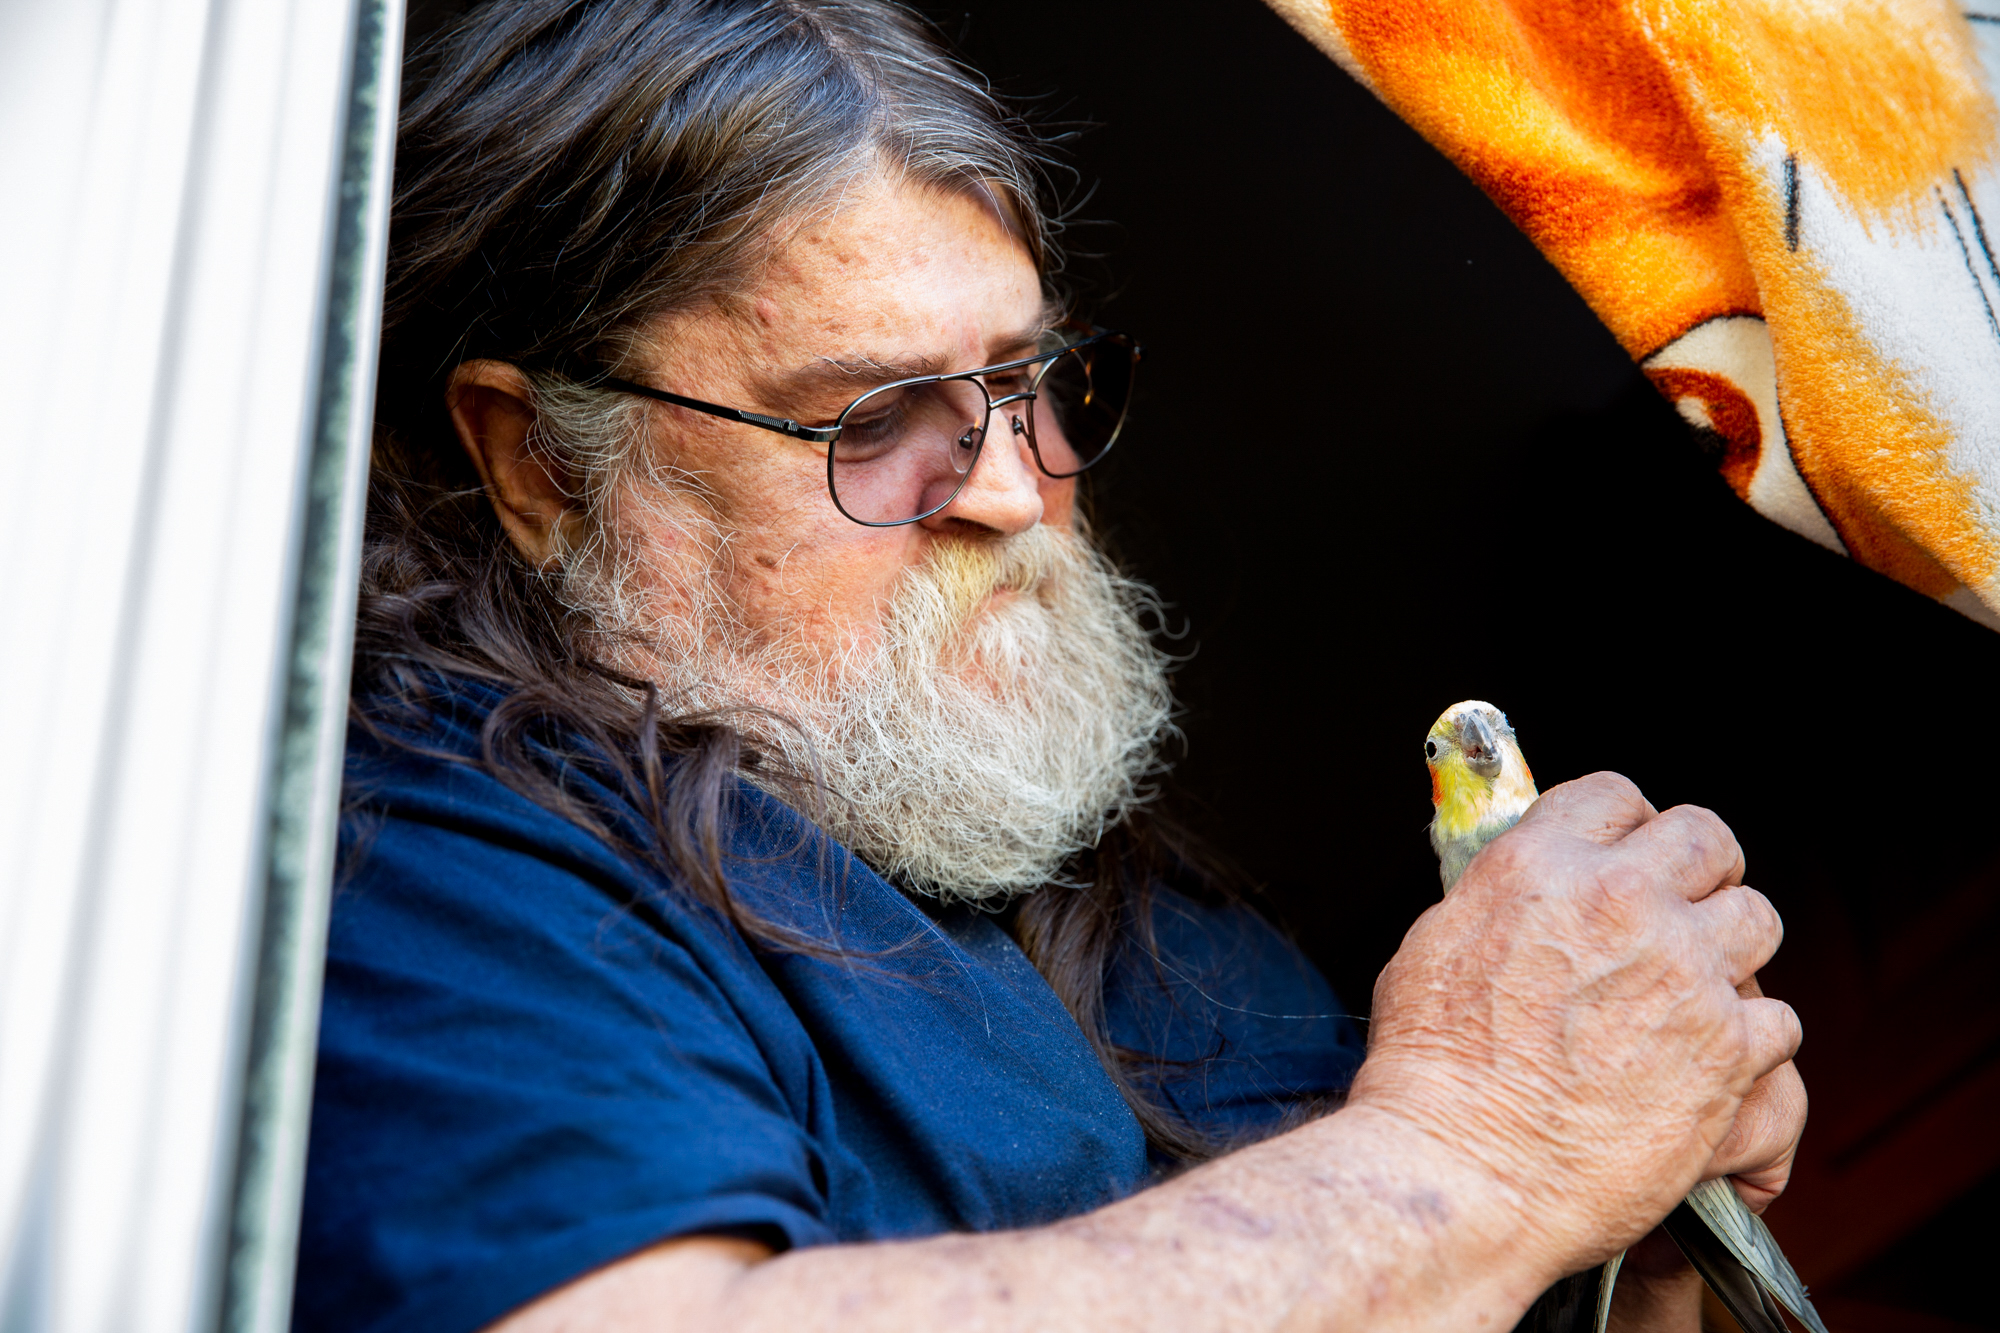 David Ramey - David Ramey, 65, lost his home of 30 years in Paradise, California, to the Camp Fire in 2018. He is living in a trailer in Chico, accompanied by his pet cockatiel, also named Chico because Ramey rescued him from a Chico parking lot 14 years ago. Ramey's son would like to return to Paradise, but Ramey says that he would be too stressed. (Allie Barton/News21)